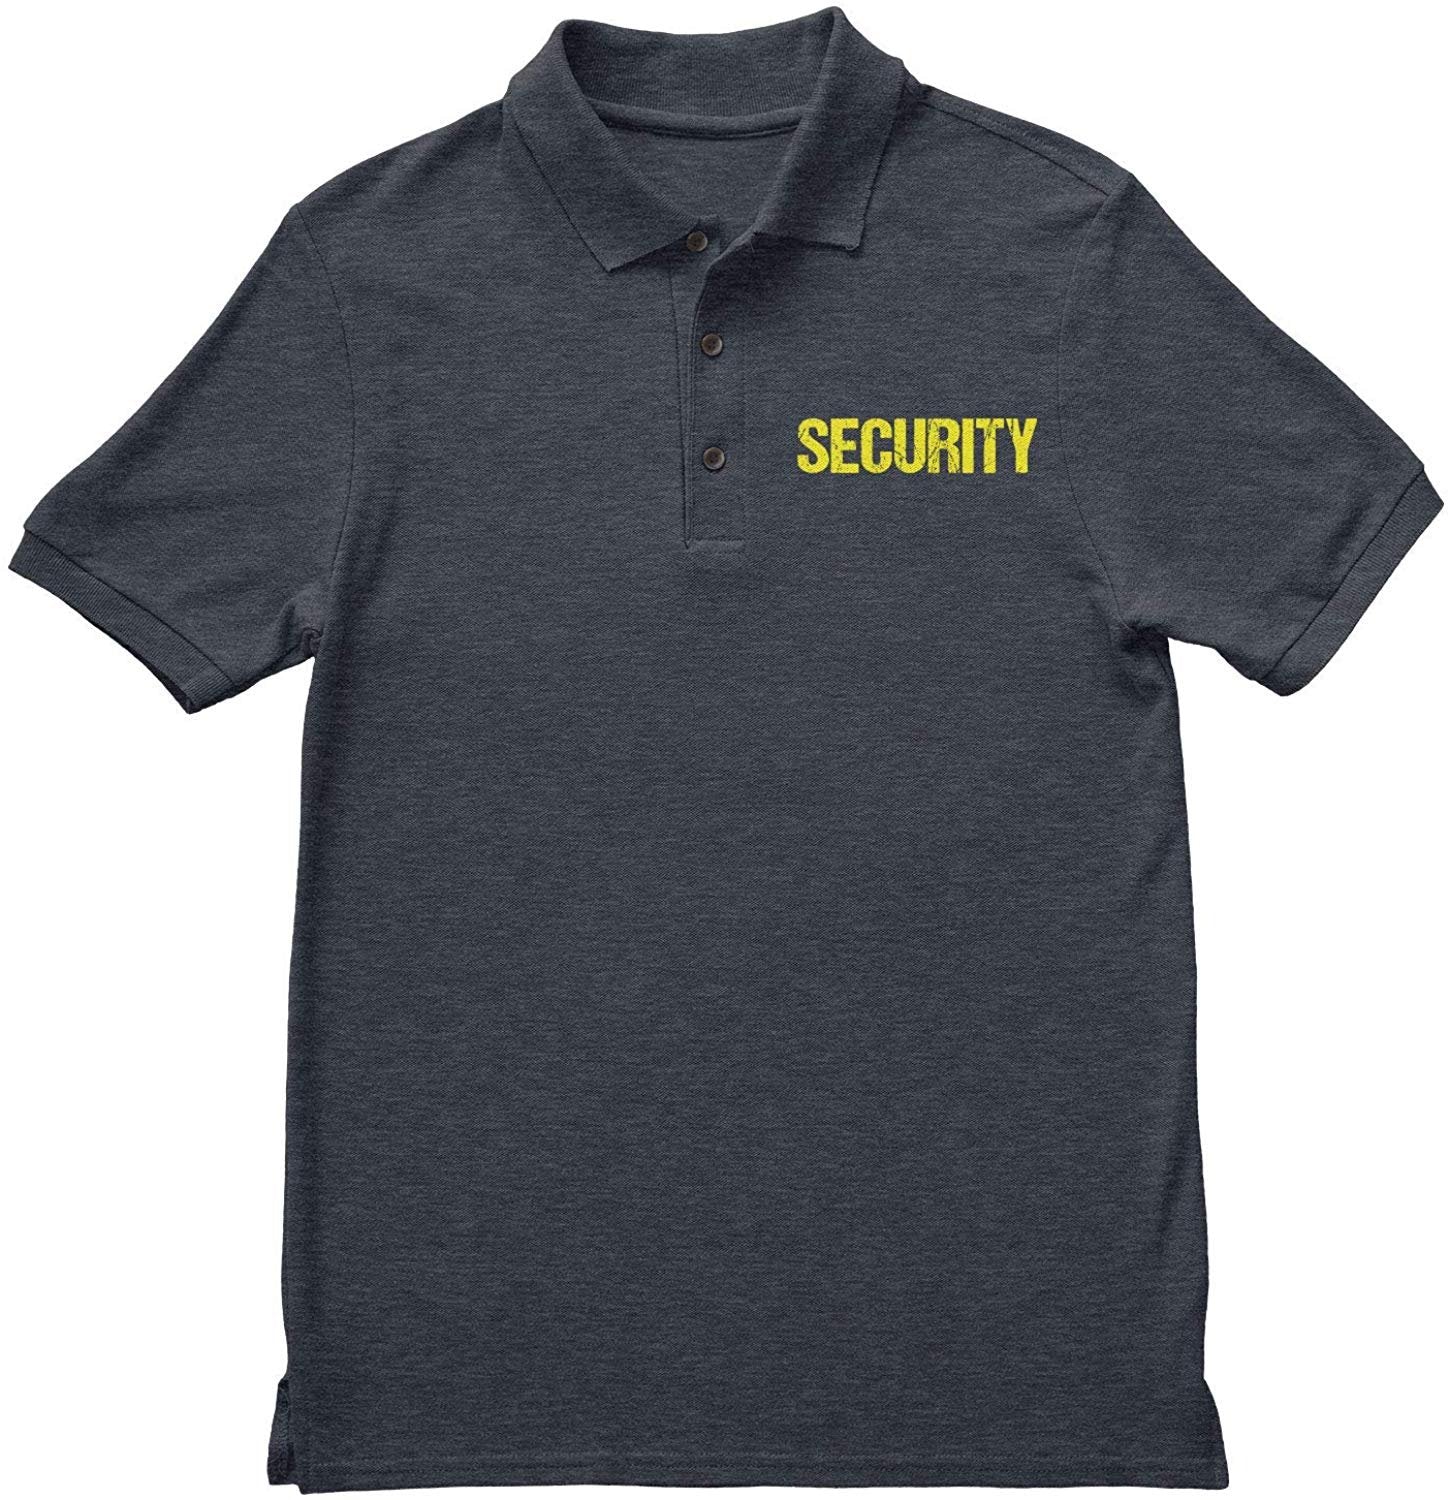 Security Polo Shirt Front & Back Print (Distressed, Charcoal & Neon)